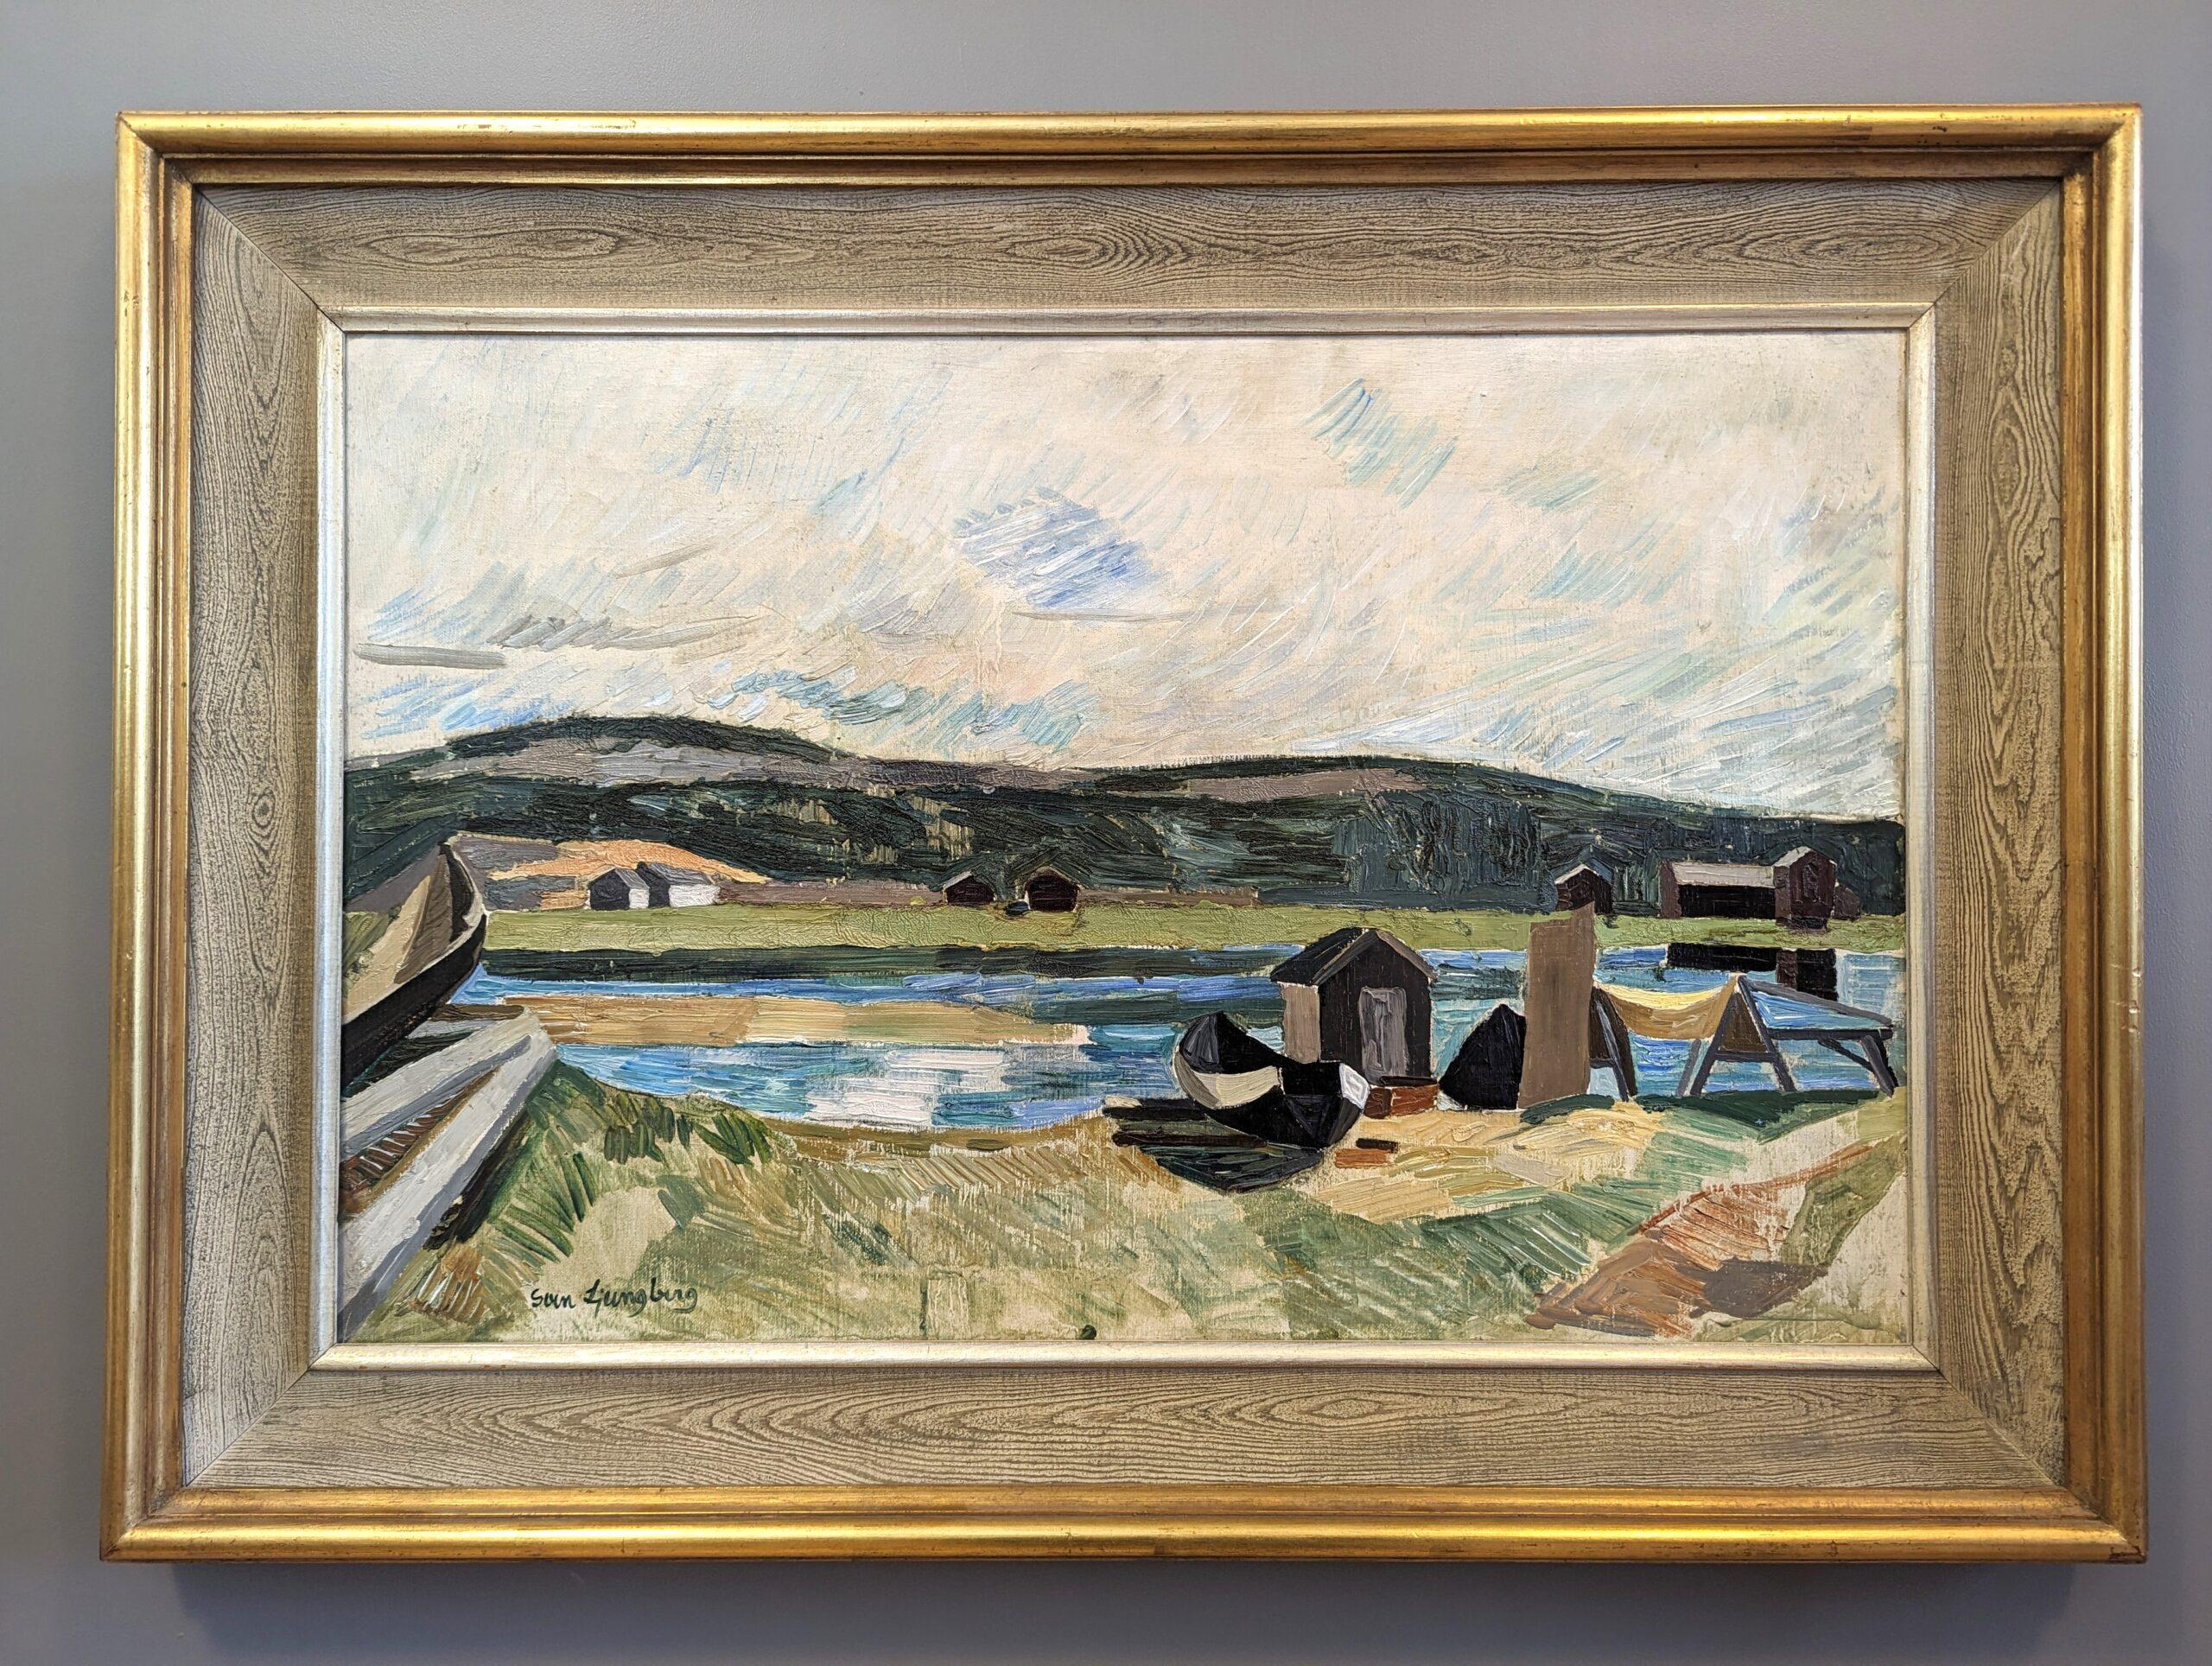 OBSERVE
Size: 59 x 82 cm (including frame)
Oil on Canvas

An outstanding and expressive mid-century modernist style landscape composition, executed in oil onto canvas.

In the middle ground, a tranquil lake stretches across the canvas, with a view